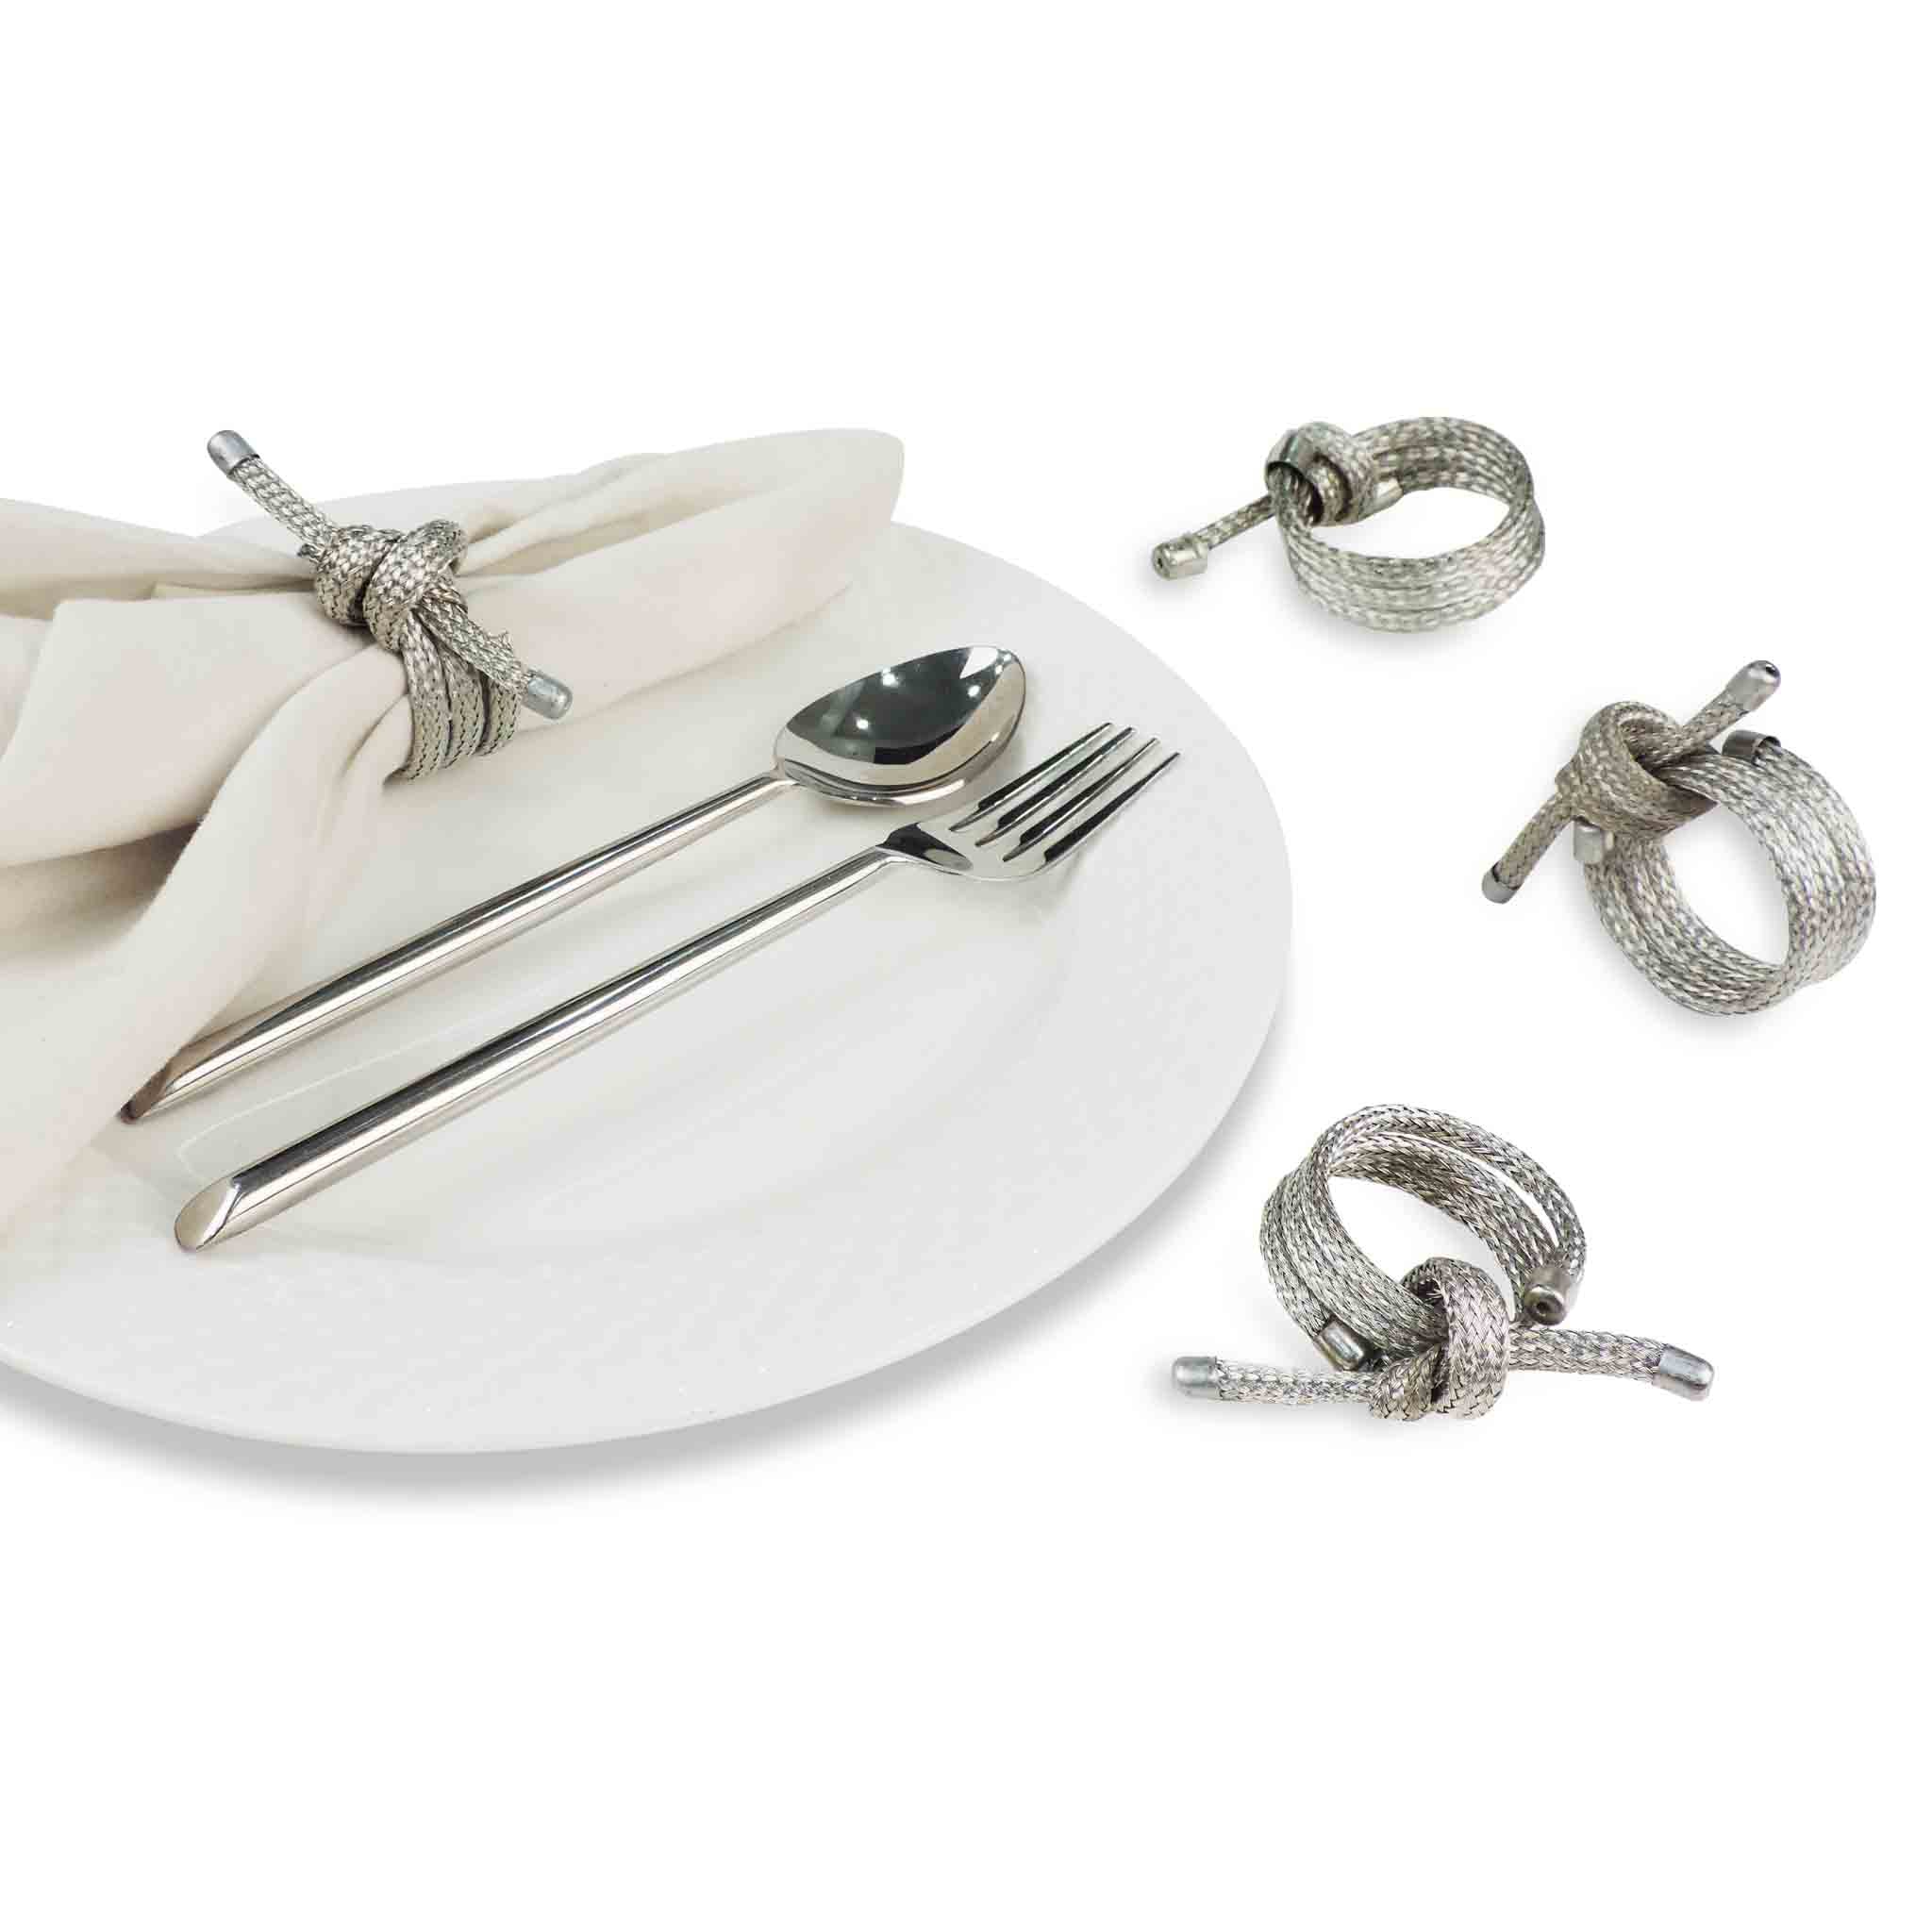 Top Knot Napkin Ring in Silver, Set of 4